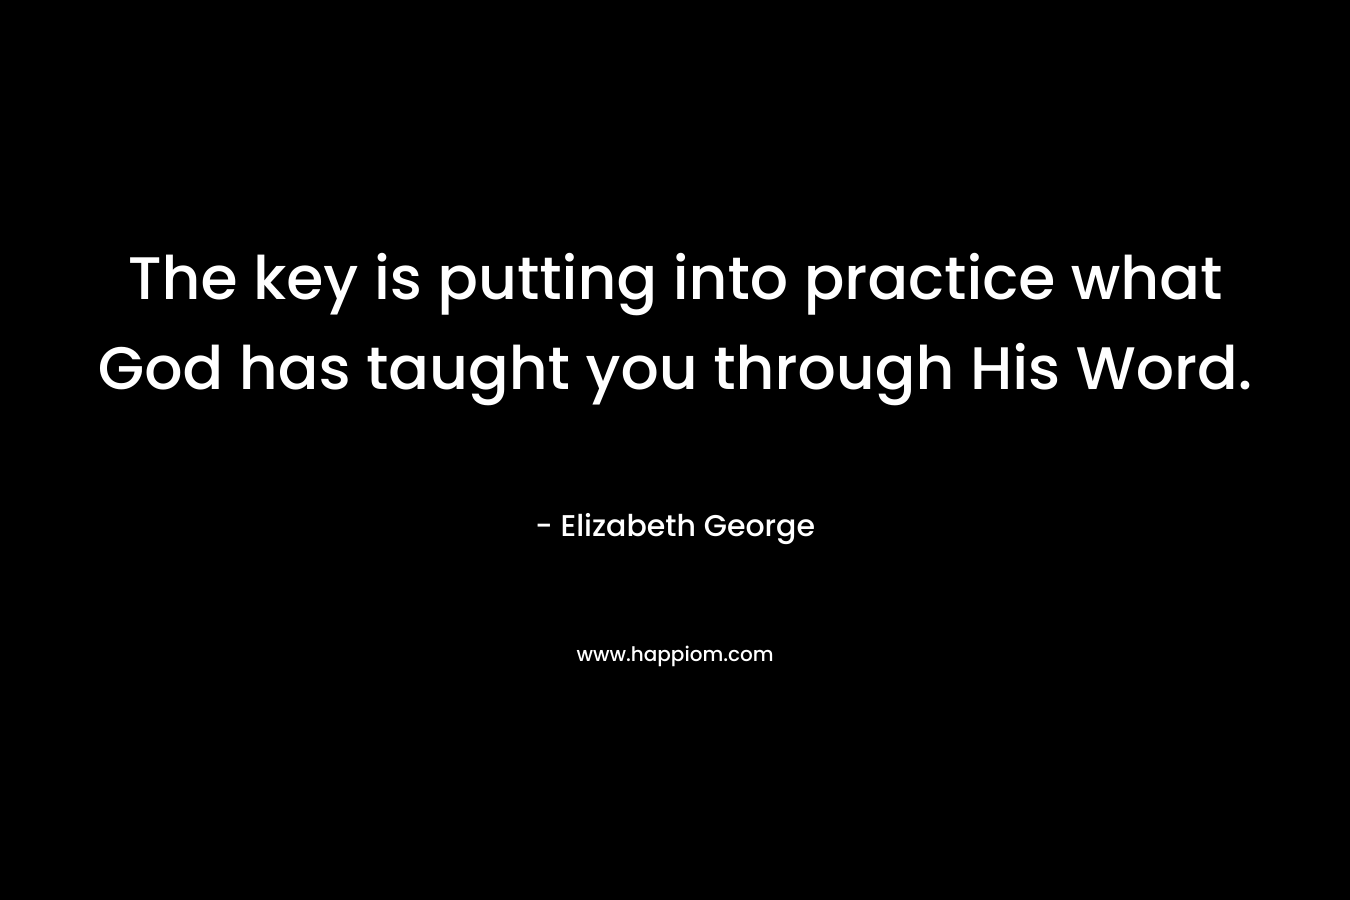 The key is putting into practice what God has taught you through His Word. – Elizabeth George